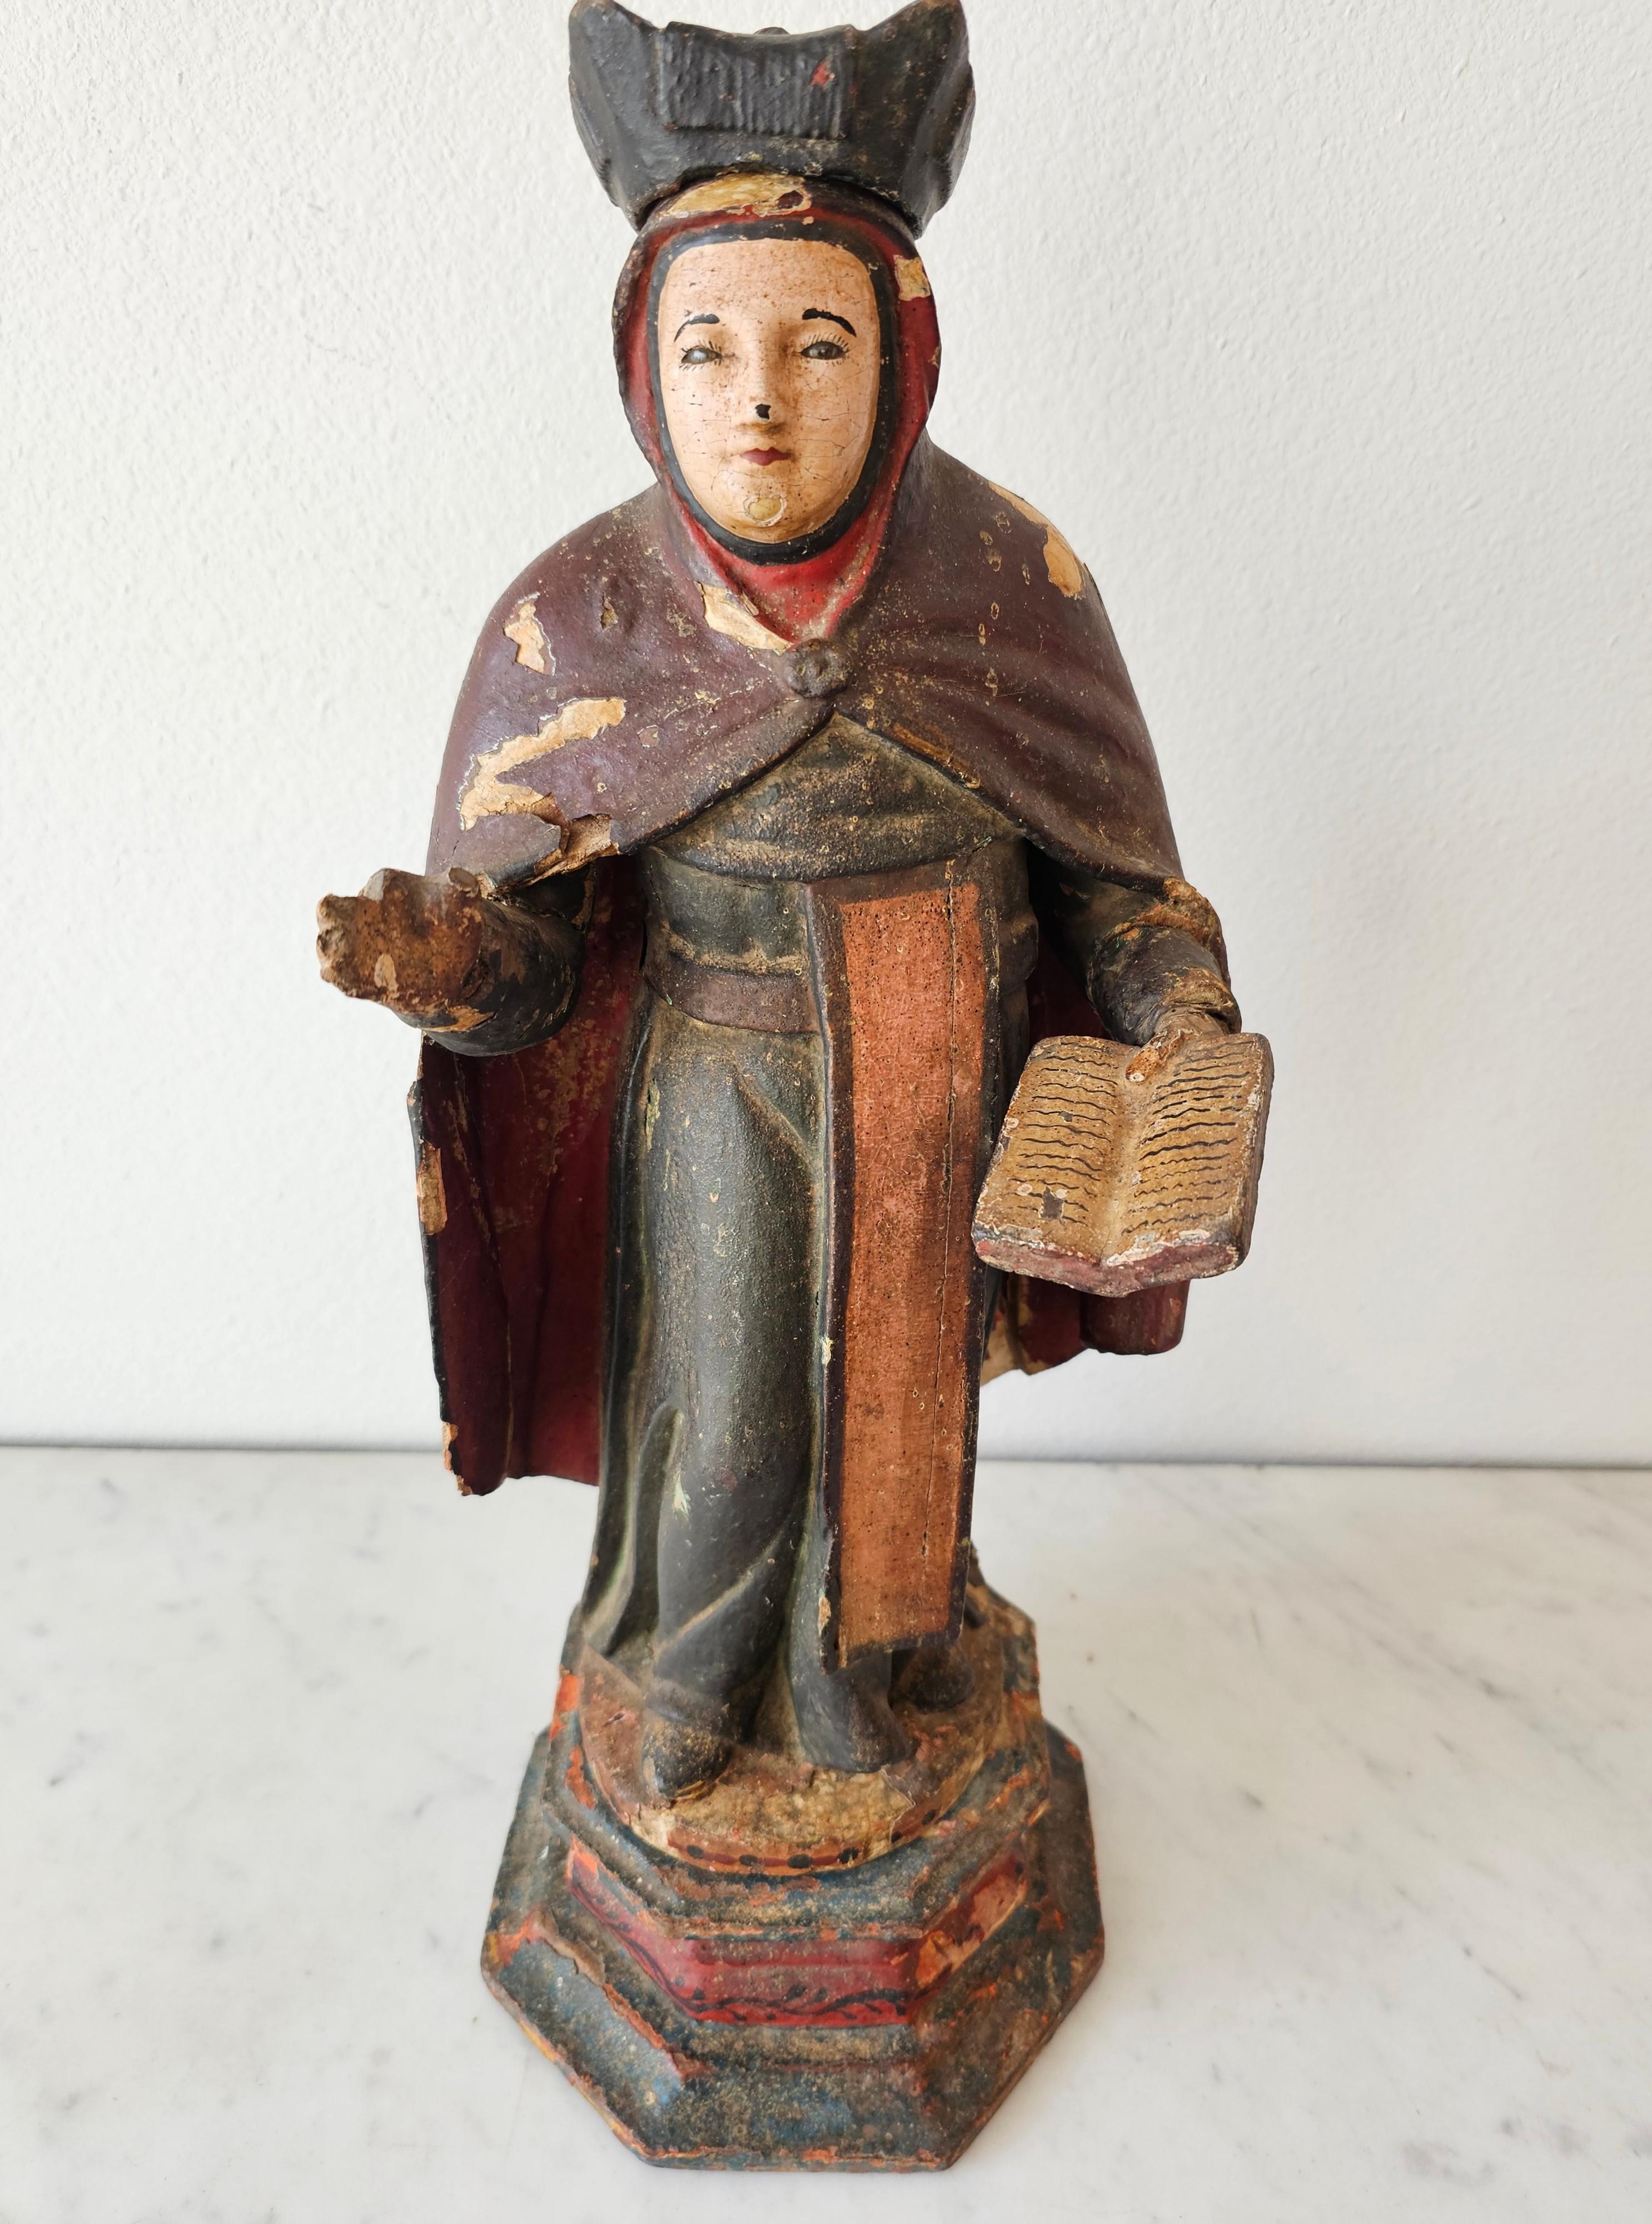 A most impressive antique Spanish Colonial hand carved polychromed wood Santo Catholic church altar figure. circa 1800

Hand-crafted in the late 18th / early 19th century, exceptionally executed intricate detailing, the large scale antique religious